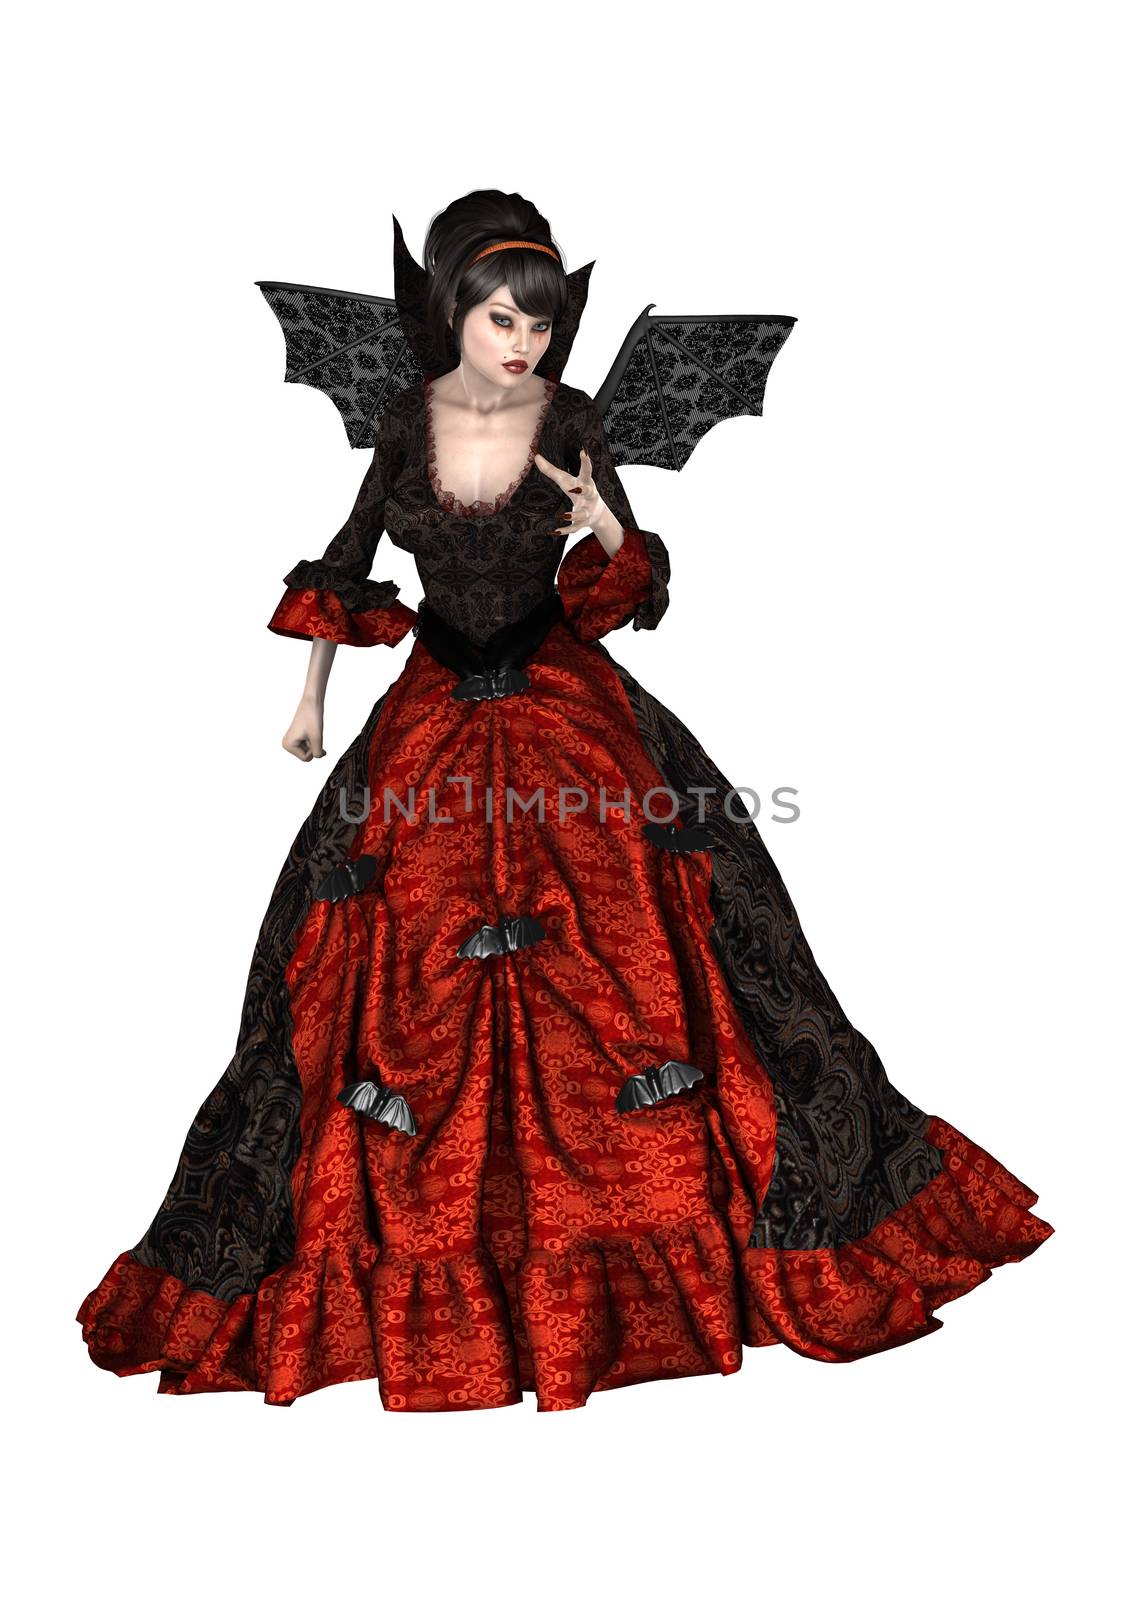 3D digital render of a beautiful witch isolated on white background